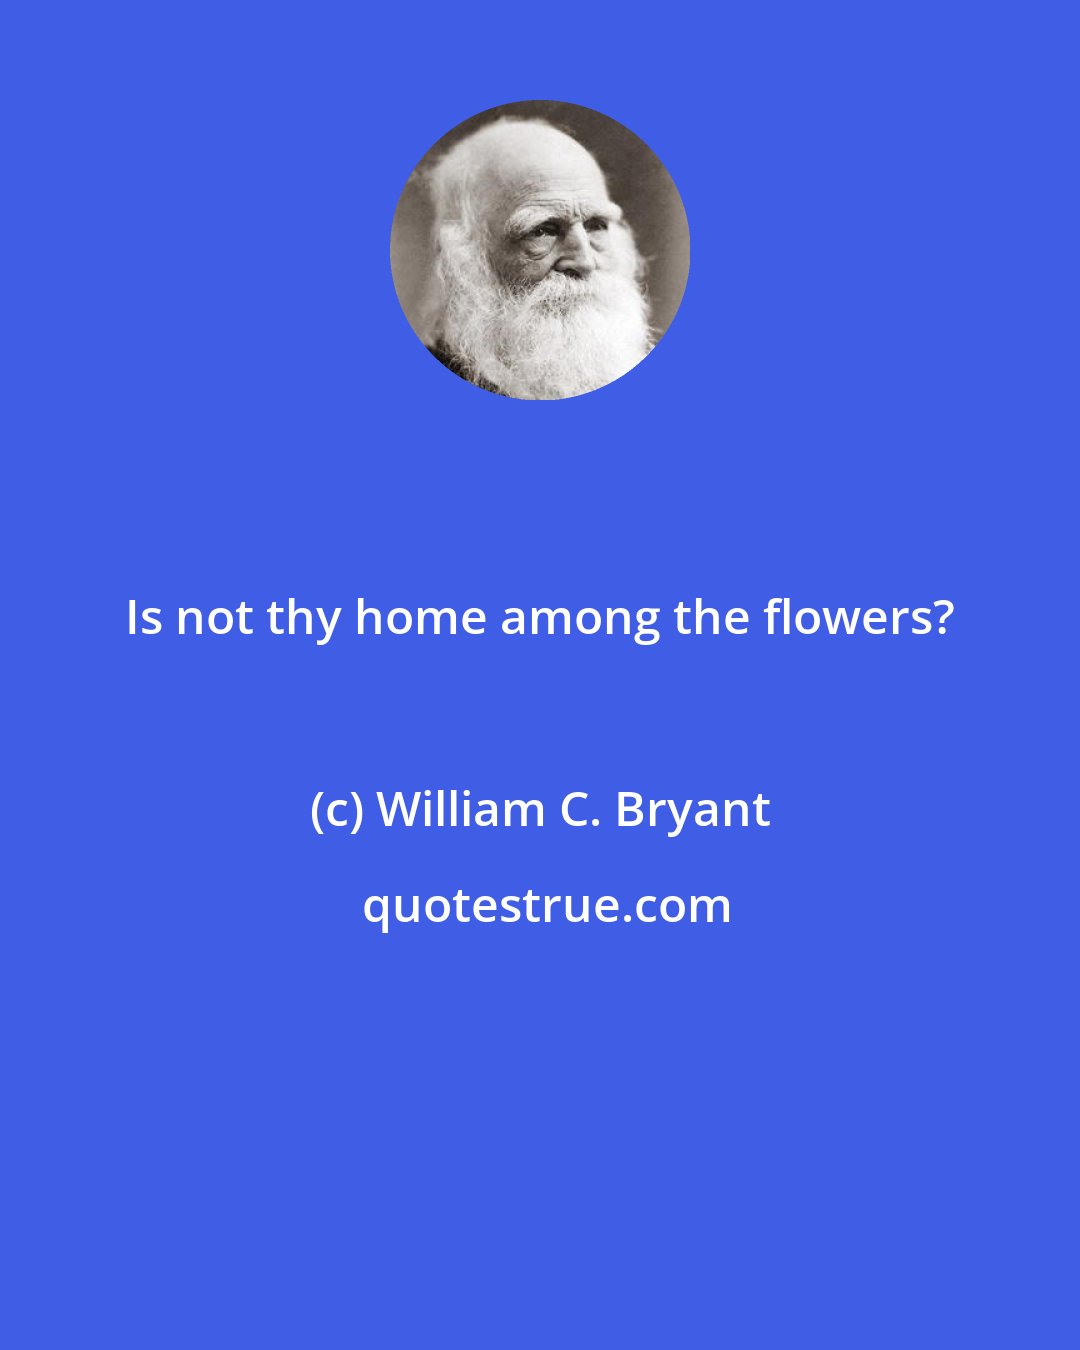 William C. Bryant: Is not thy home among the flowers?